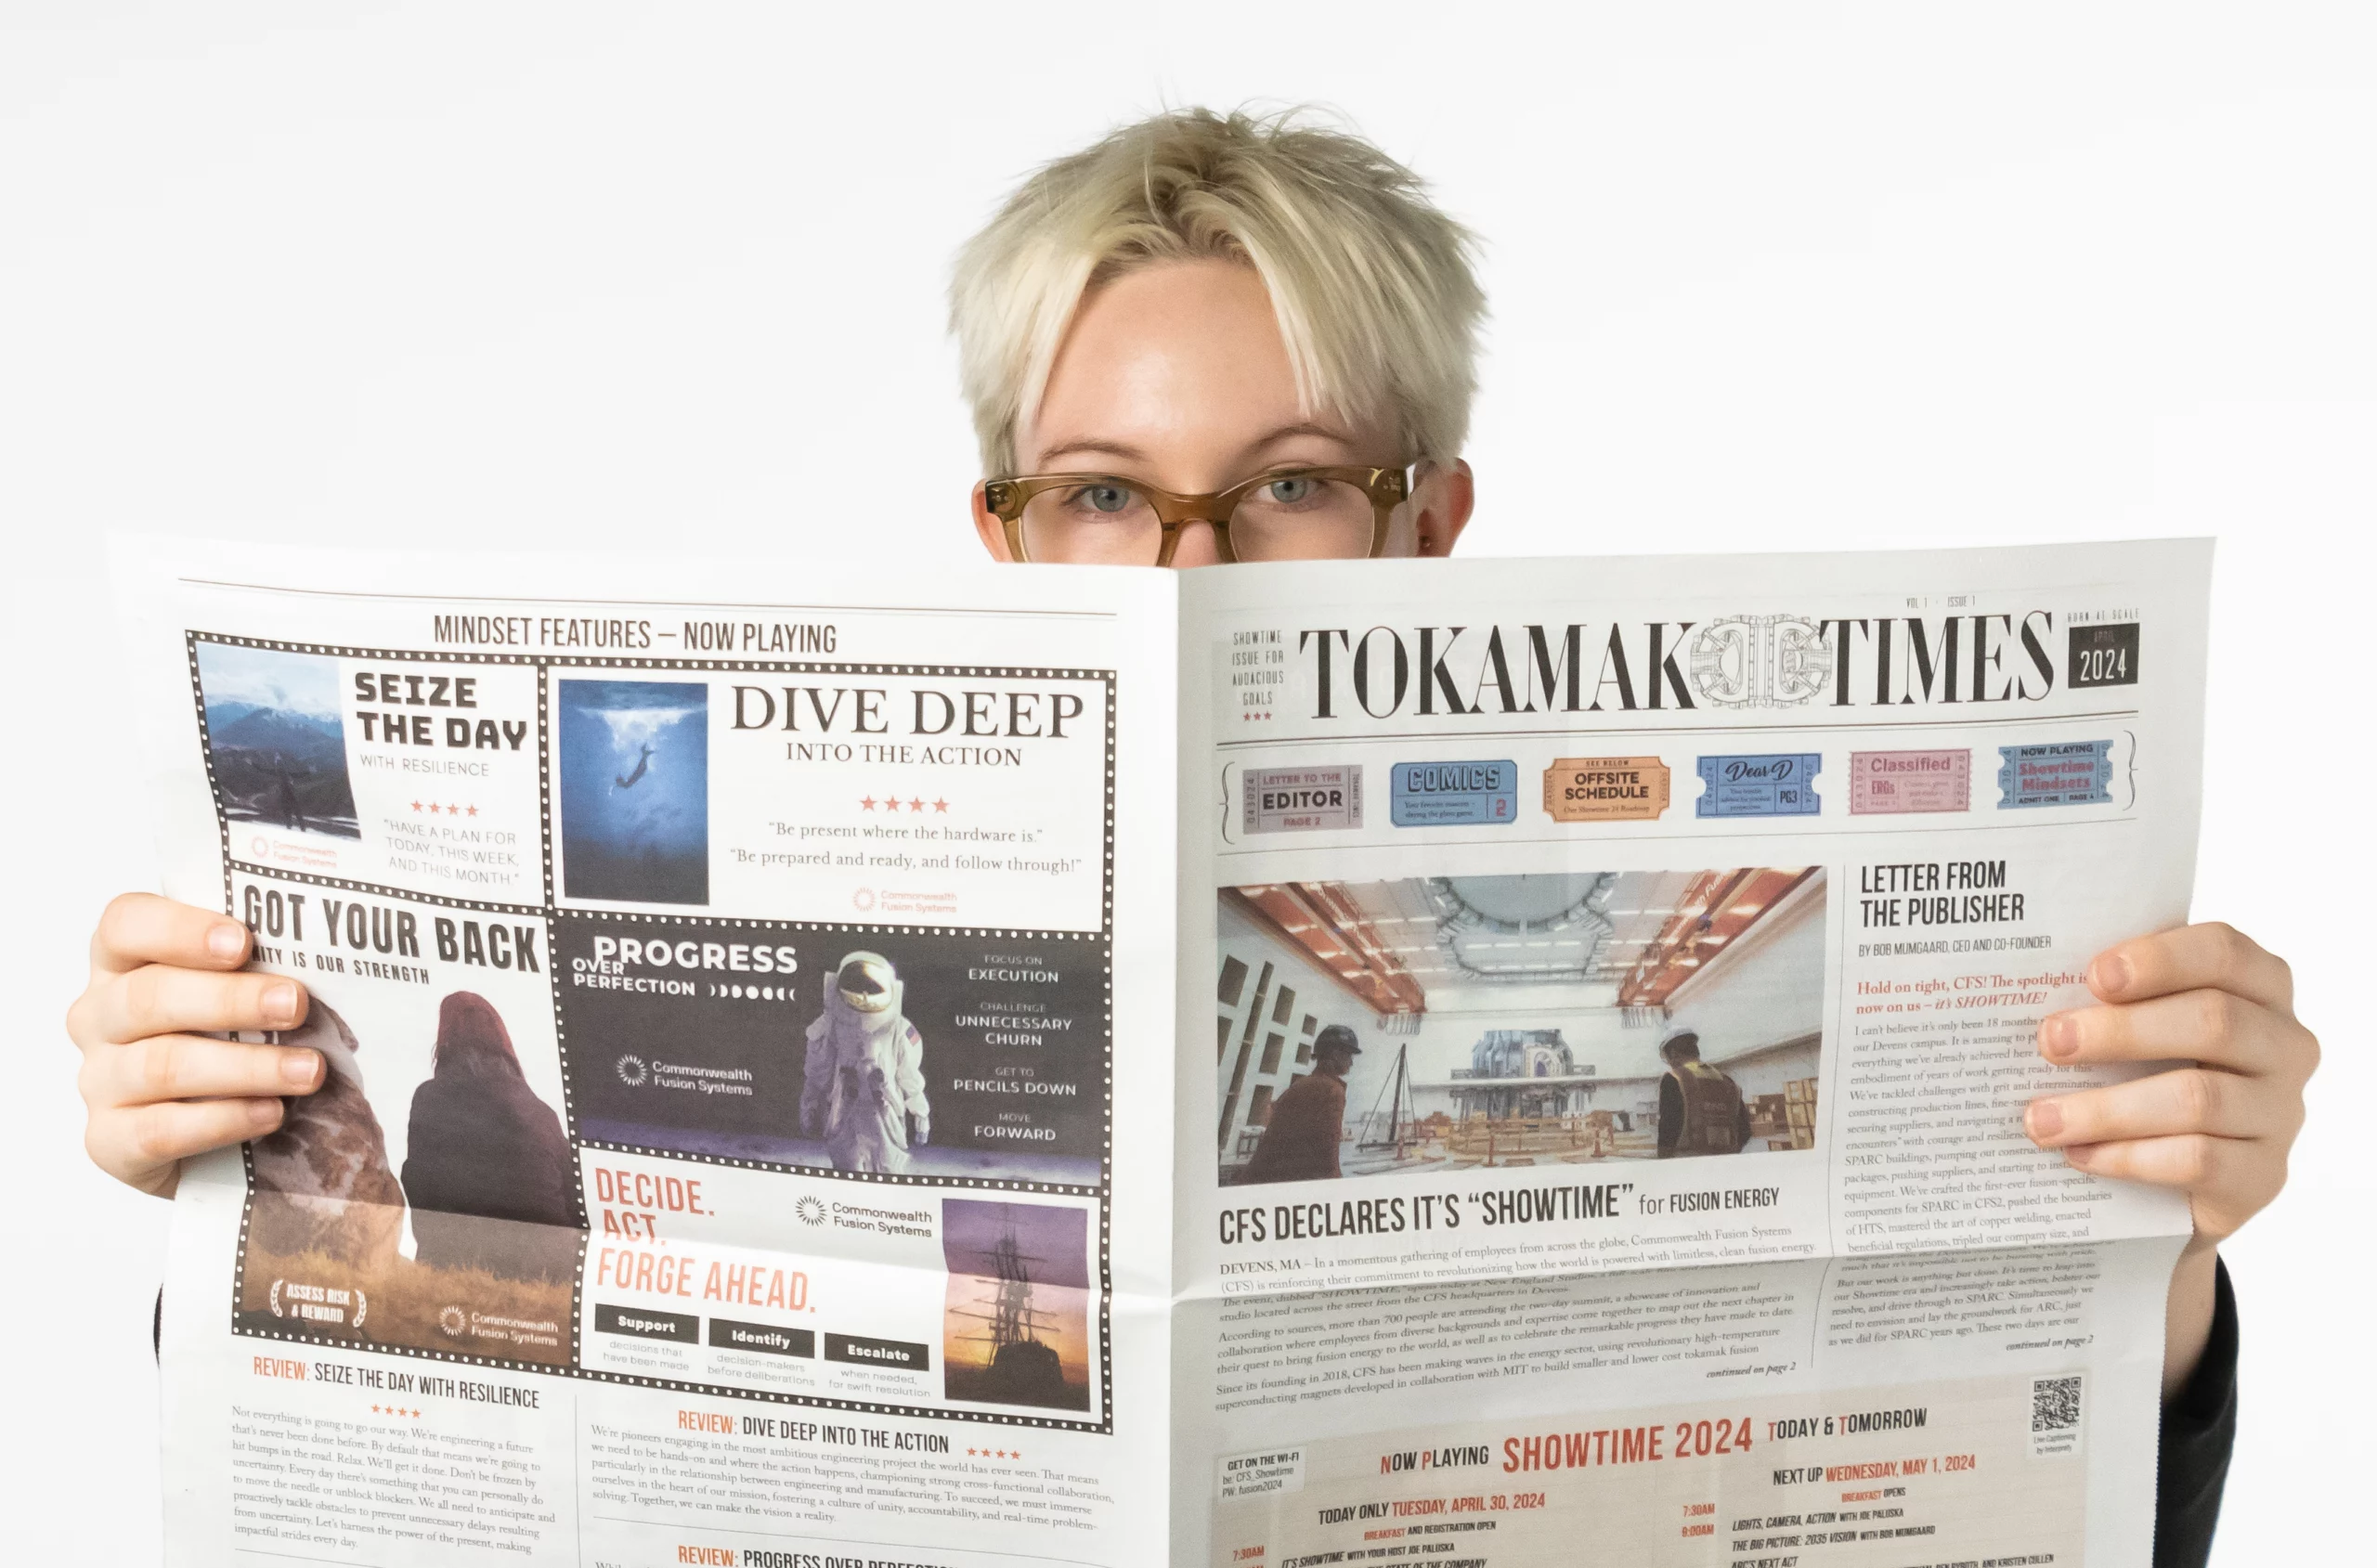 A person holds up an open tabloid size newspaper in front of them showing the size.